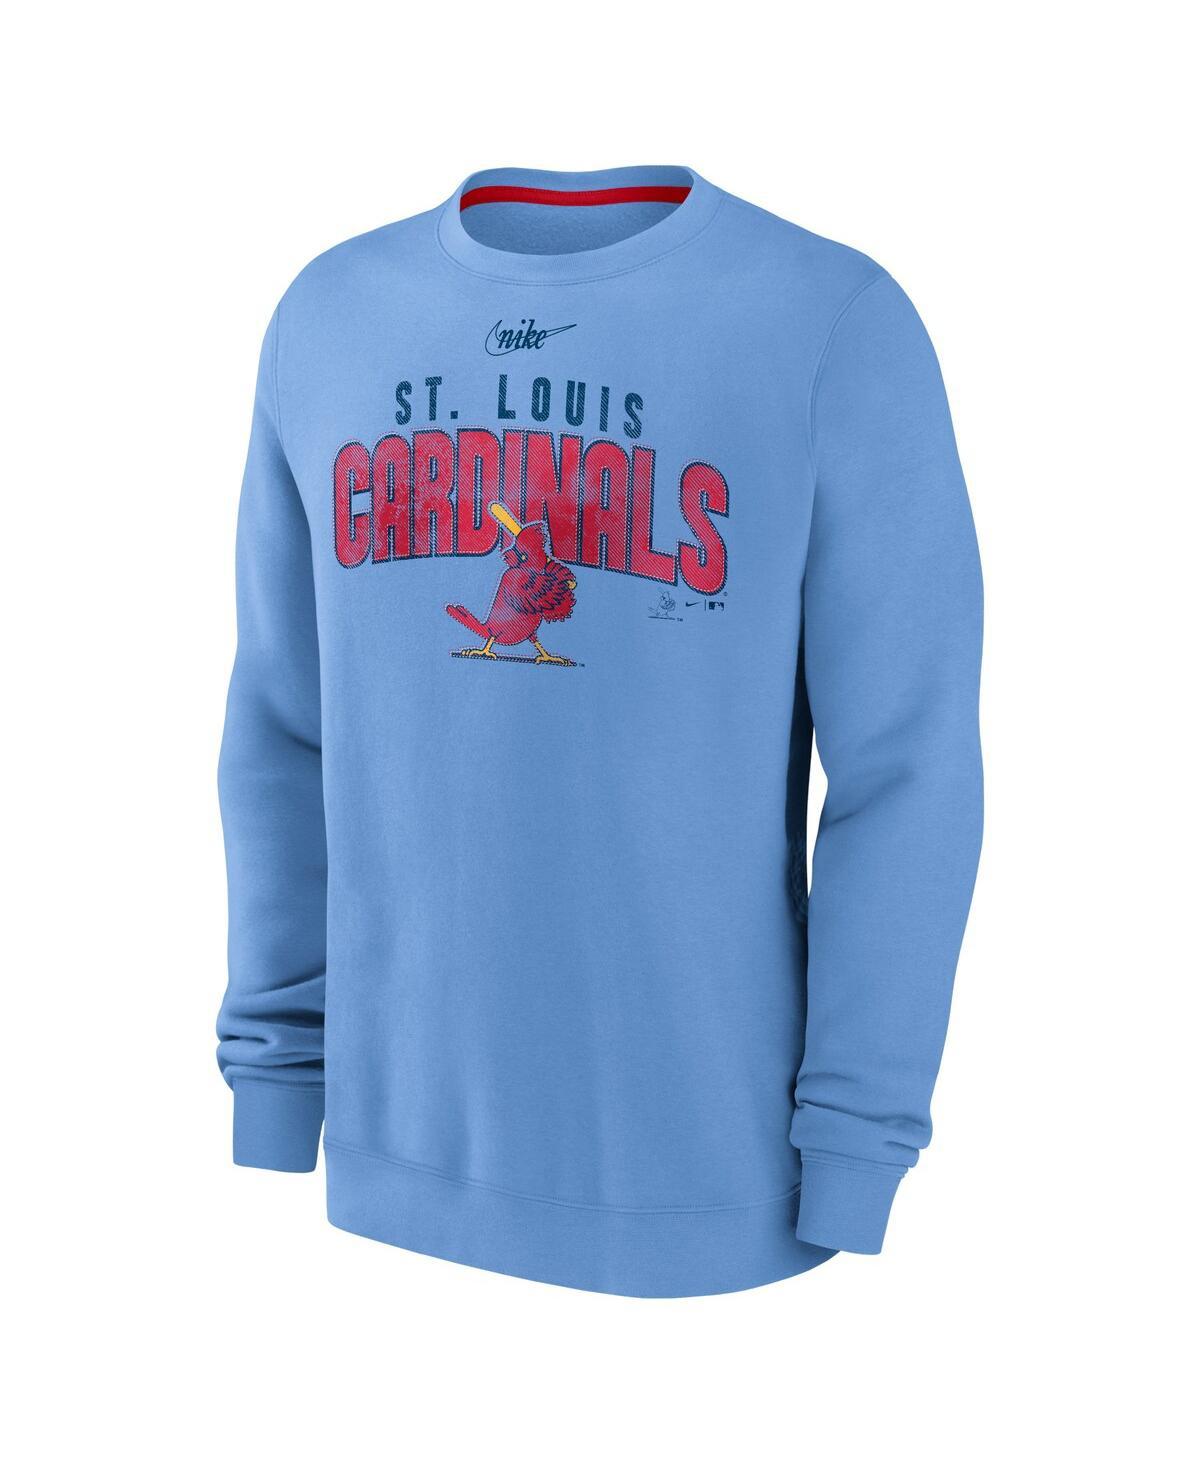 Men's Nike Light Blue St. Louis Cardinals Road Cooperstown Collection Team Jersey